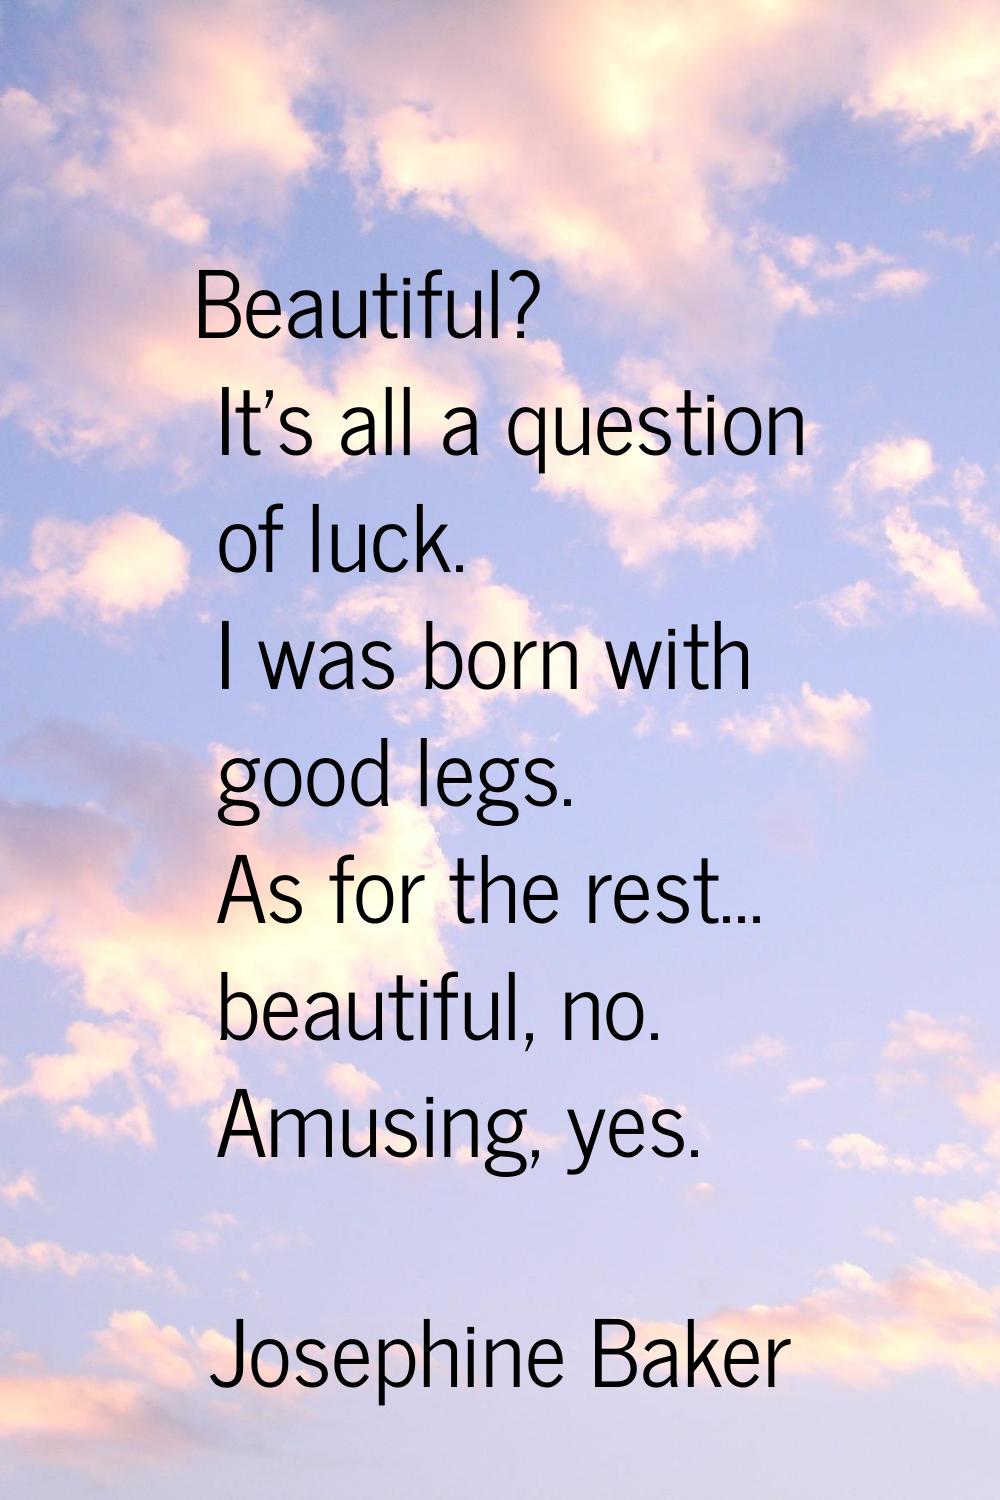 Beautiful? It's all a question of luck. I was born with good legs. As for the rest... beautiful, no